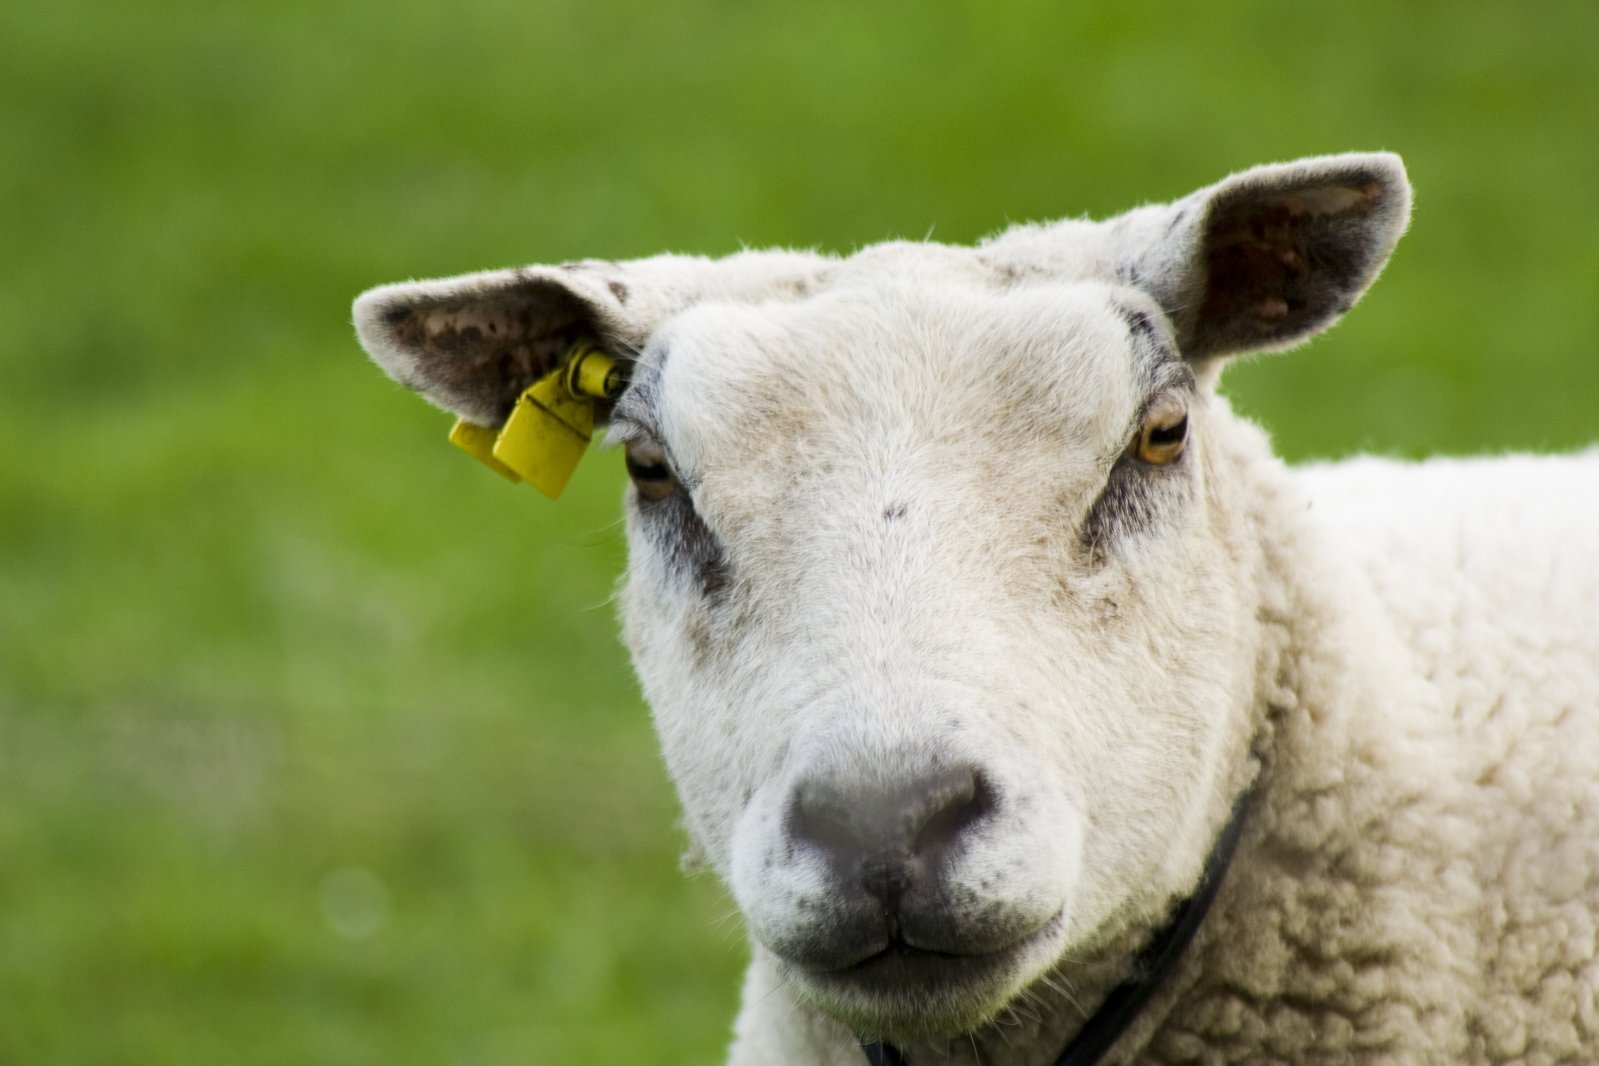 a sheep with a tag on its ear stares at the camera